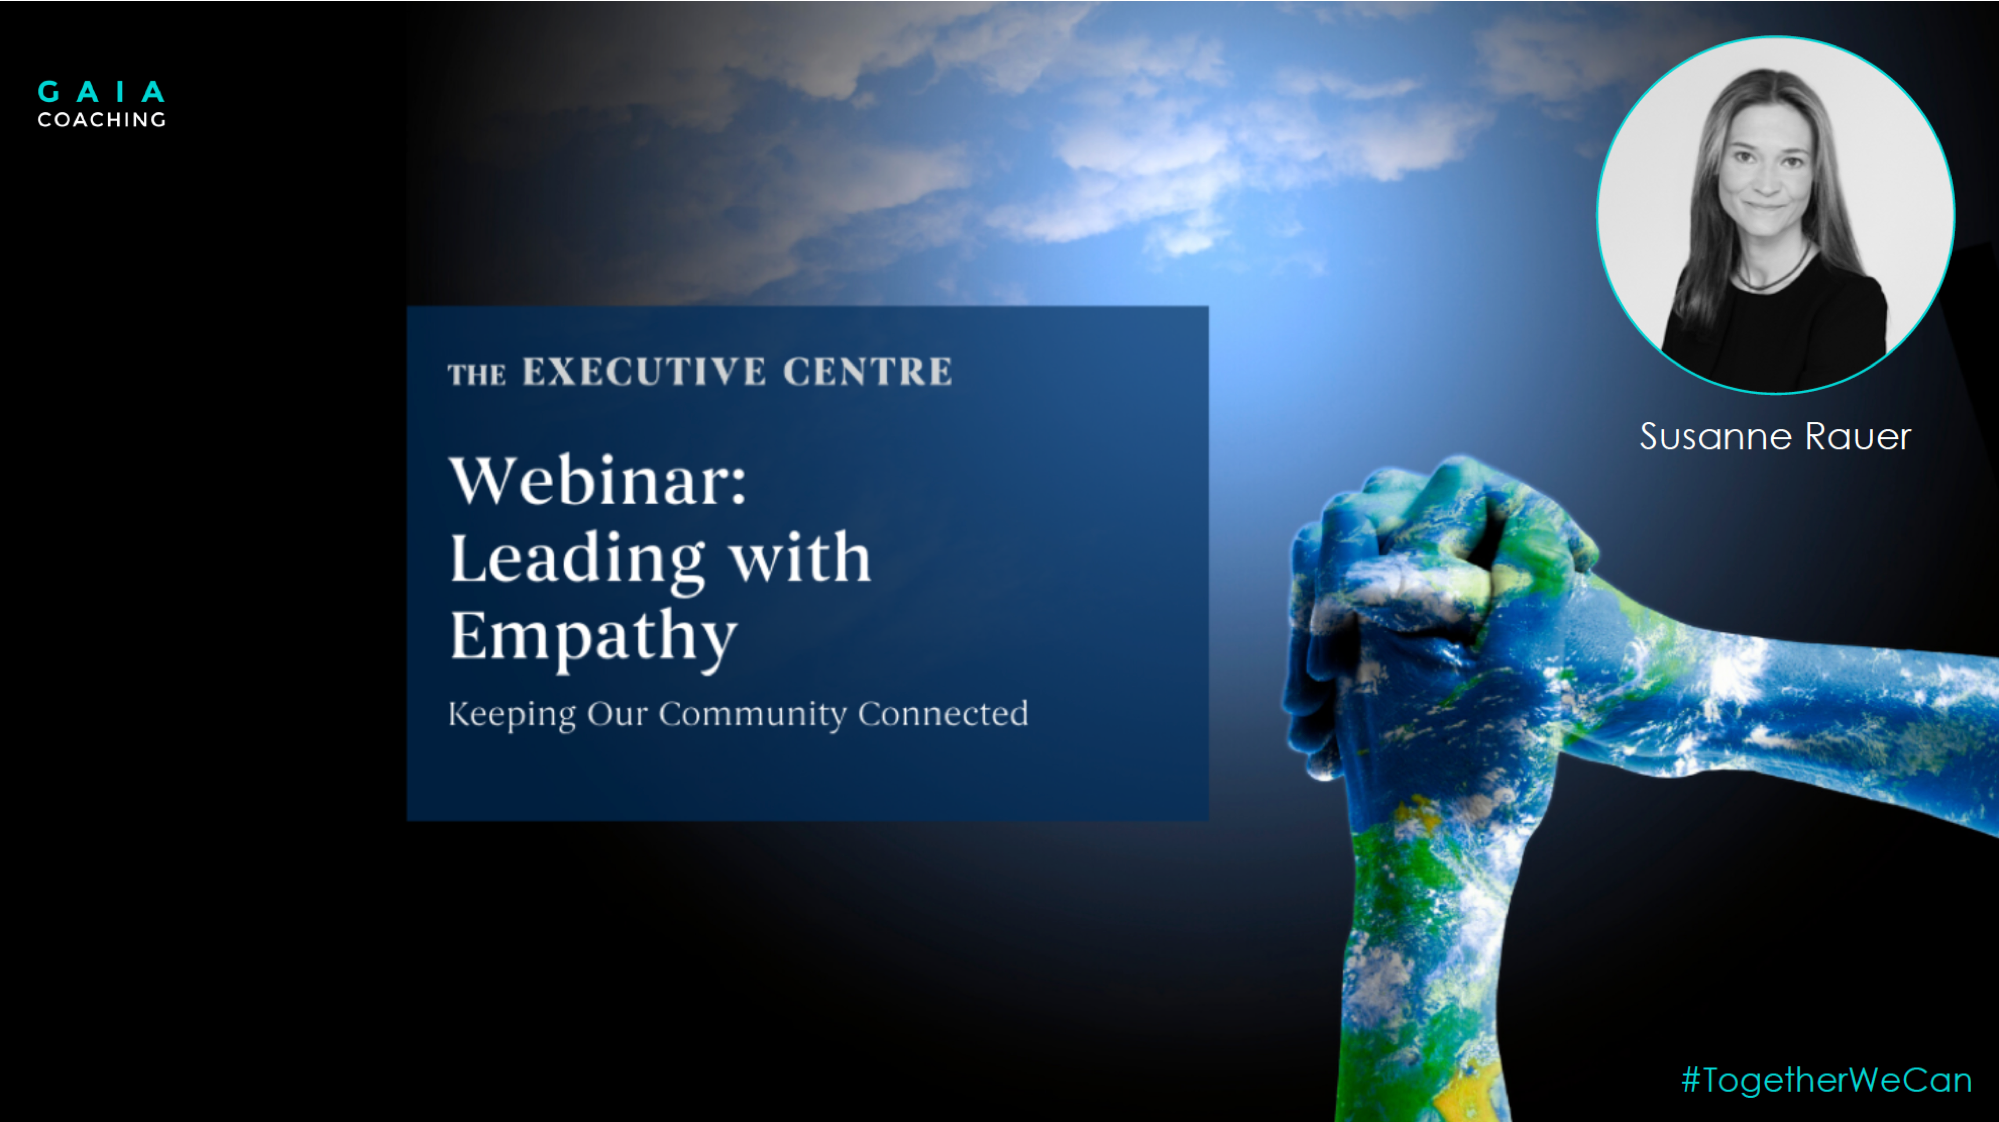 Conscious Leadership Training for Leading with Empathy in Crisis